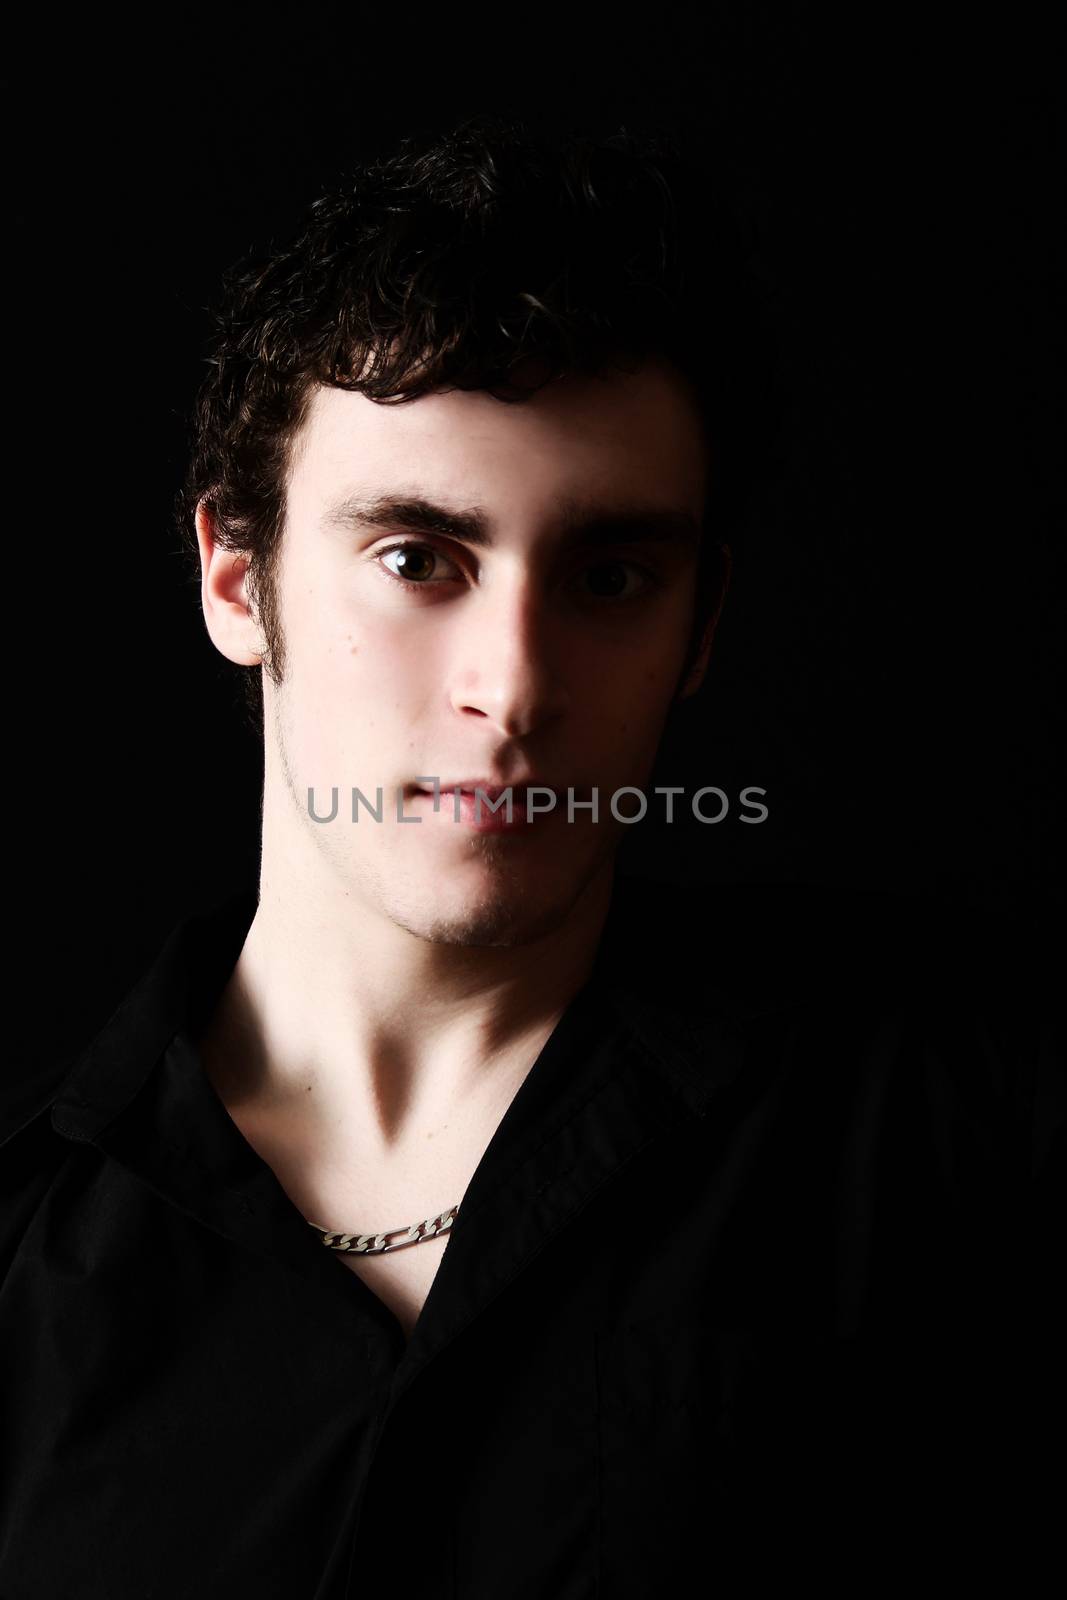 Attractive male model against black background with uneven lighting